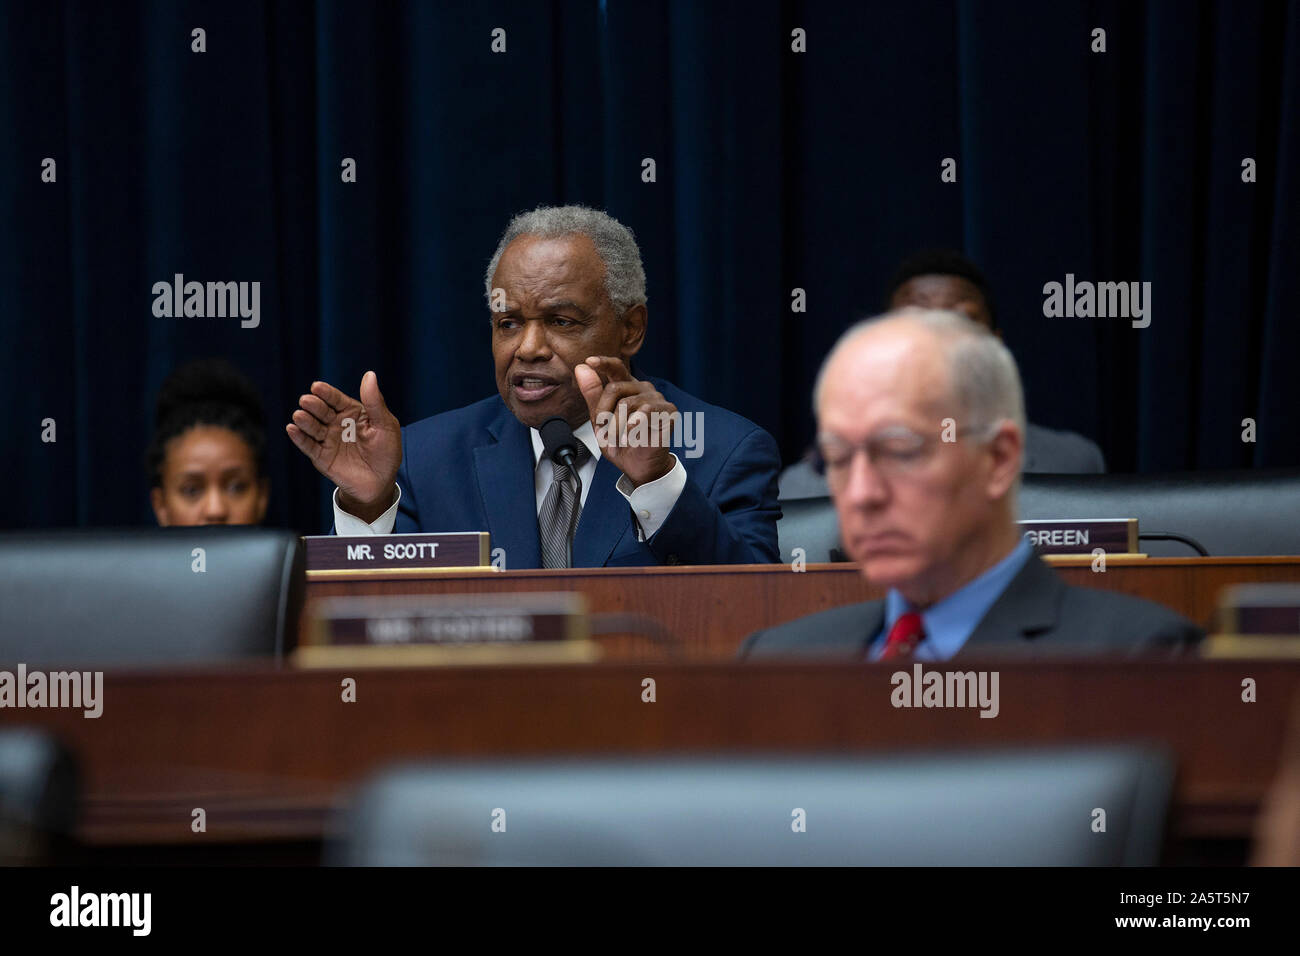 United States Representative David Scott (Democrat of Georgia) questions United States Secretary of the Treasury Steven T. Mnunchin, United States Secretary of Housing and Urban Development (HUD) Ben Carson, and Director of the Federal Housing Finance Agency Mark Calabria during a U.S. House Committee on Financial Services hearing on Capitol Hill in Washington, DC, U.S. on October 22, 2019. Credit: Stefani Reynolds/CNP | usage worldwide Stock Photo